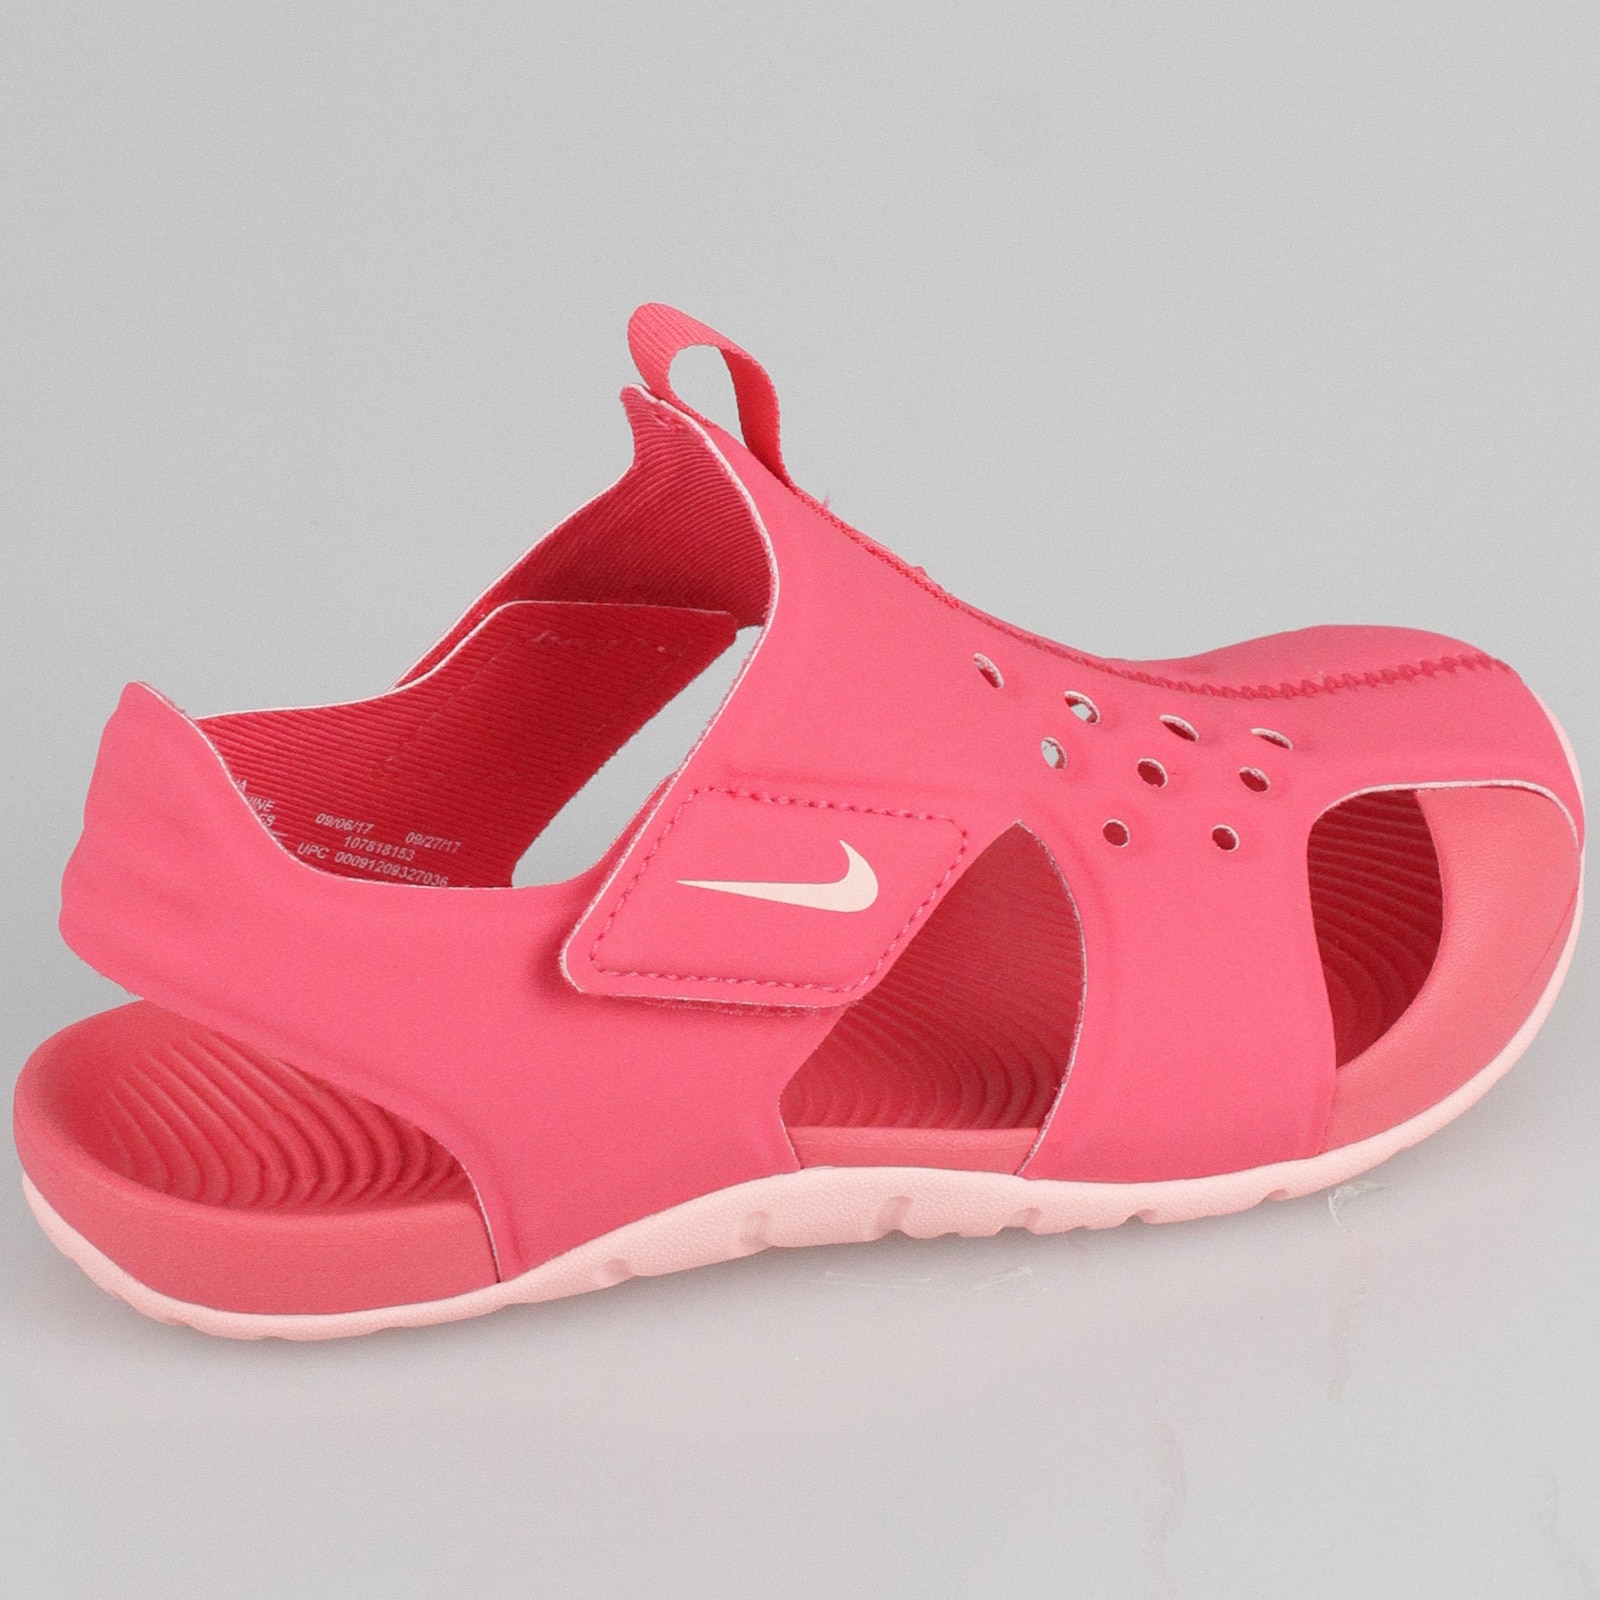 I'm thirsty Simplicity Repairman Sandale copii Nike Sunray Protect 2 943828-600, 31, Roz - eMAG.ro